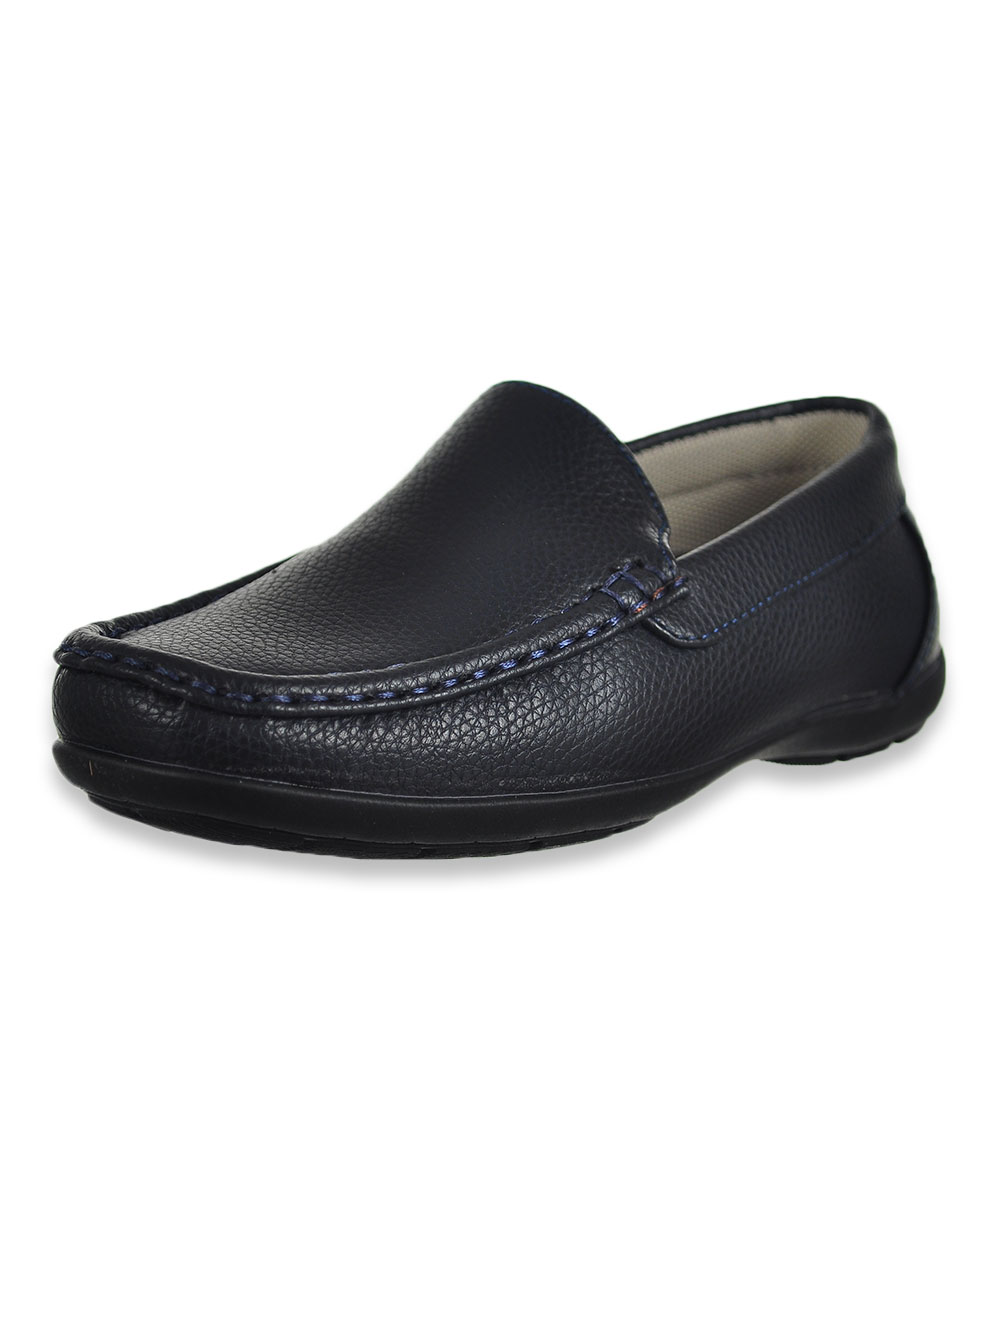 Dress Shoes Easy Strider Loafers